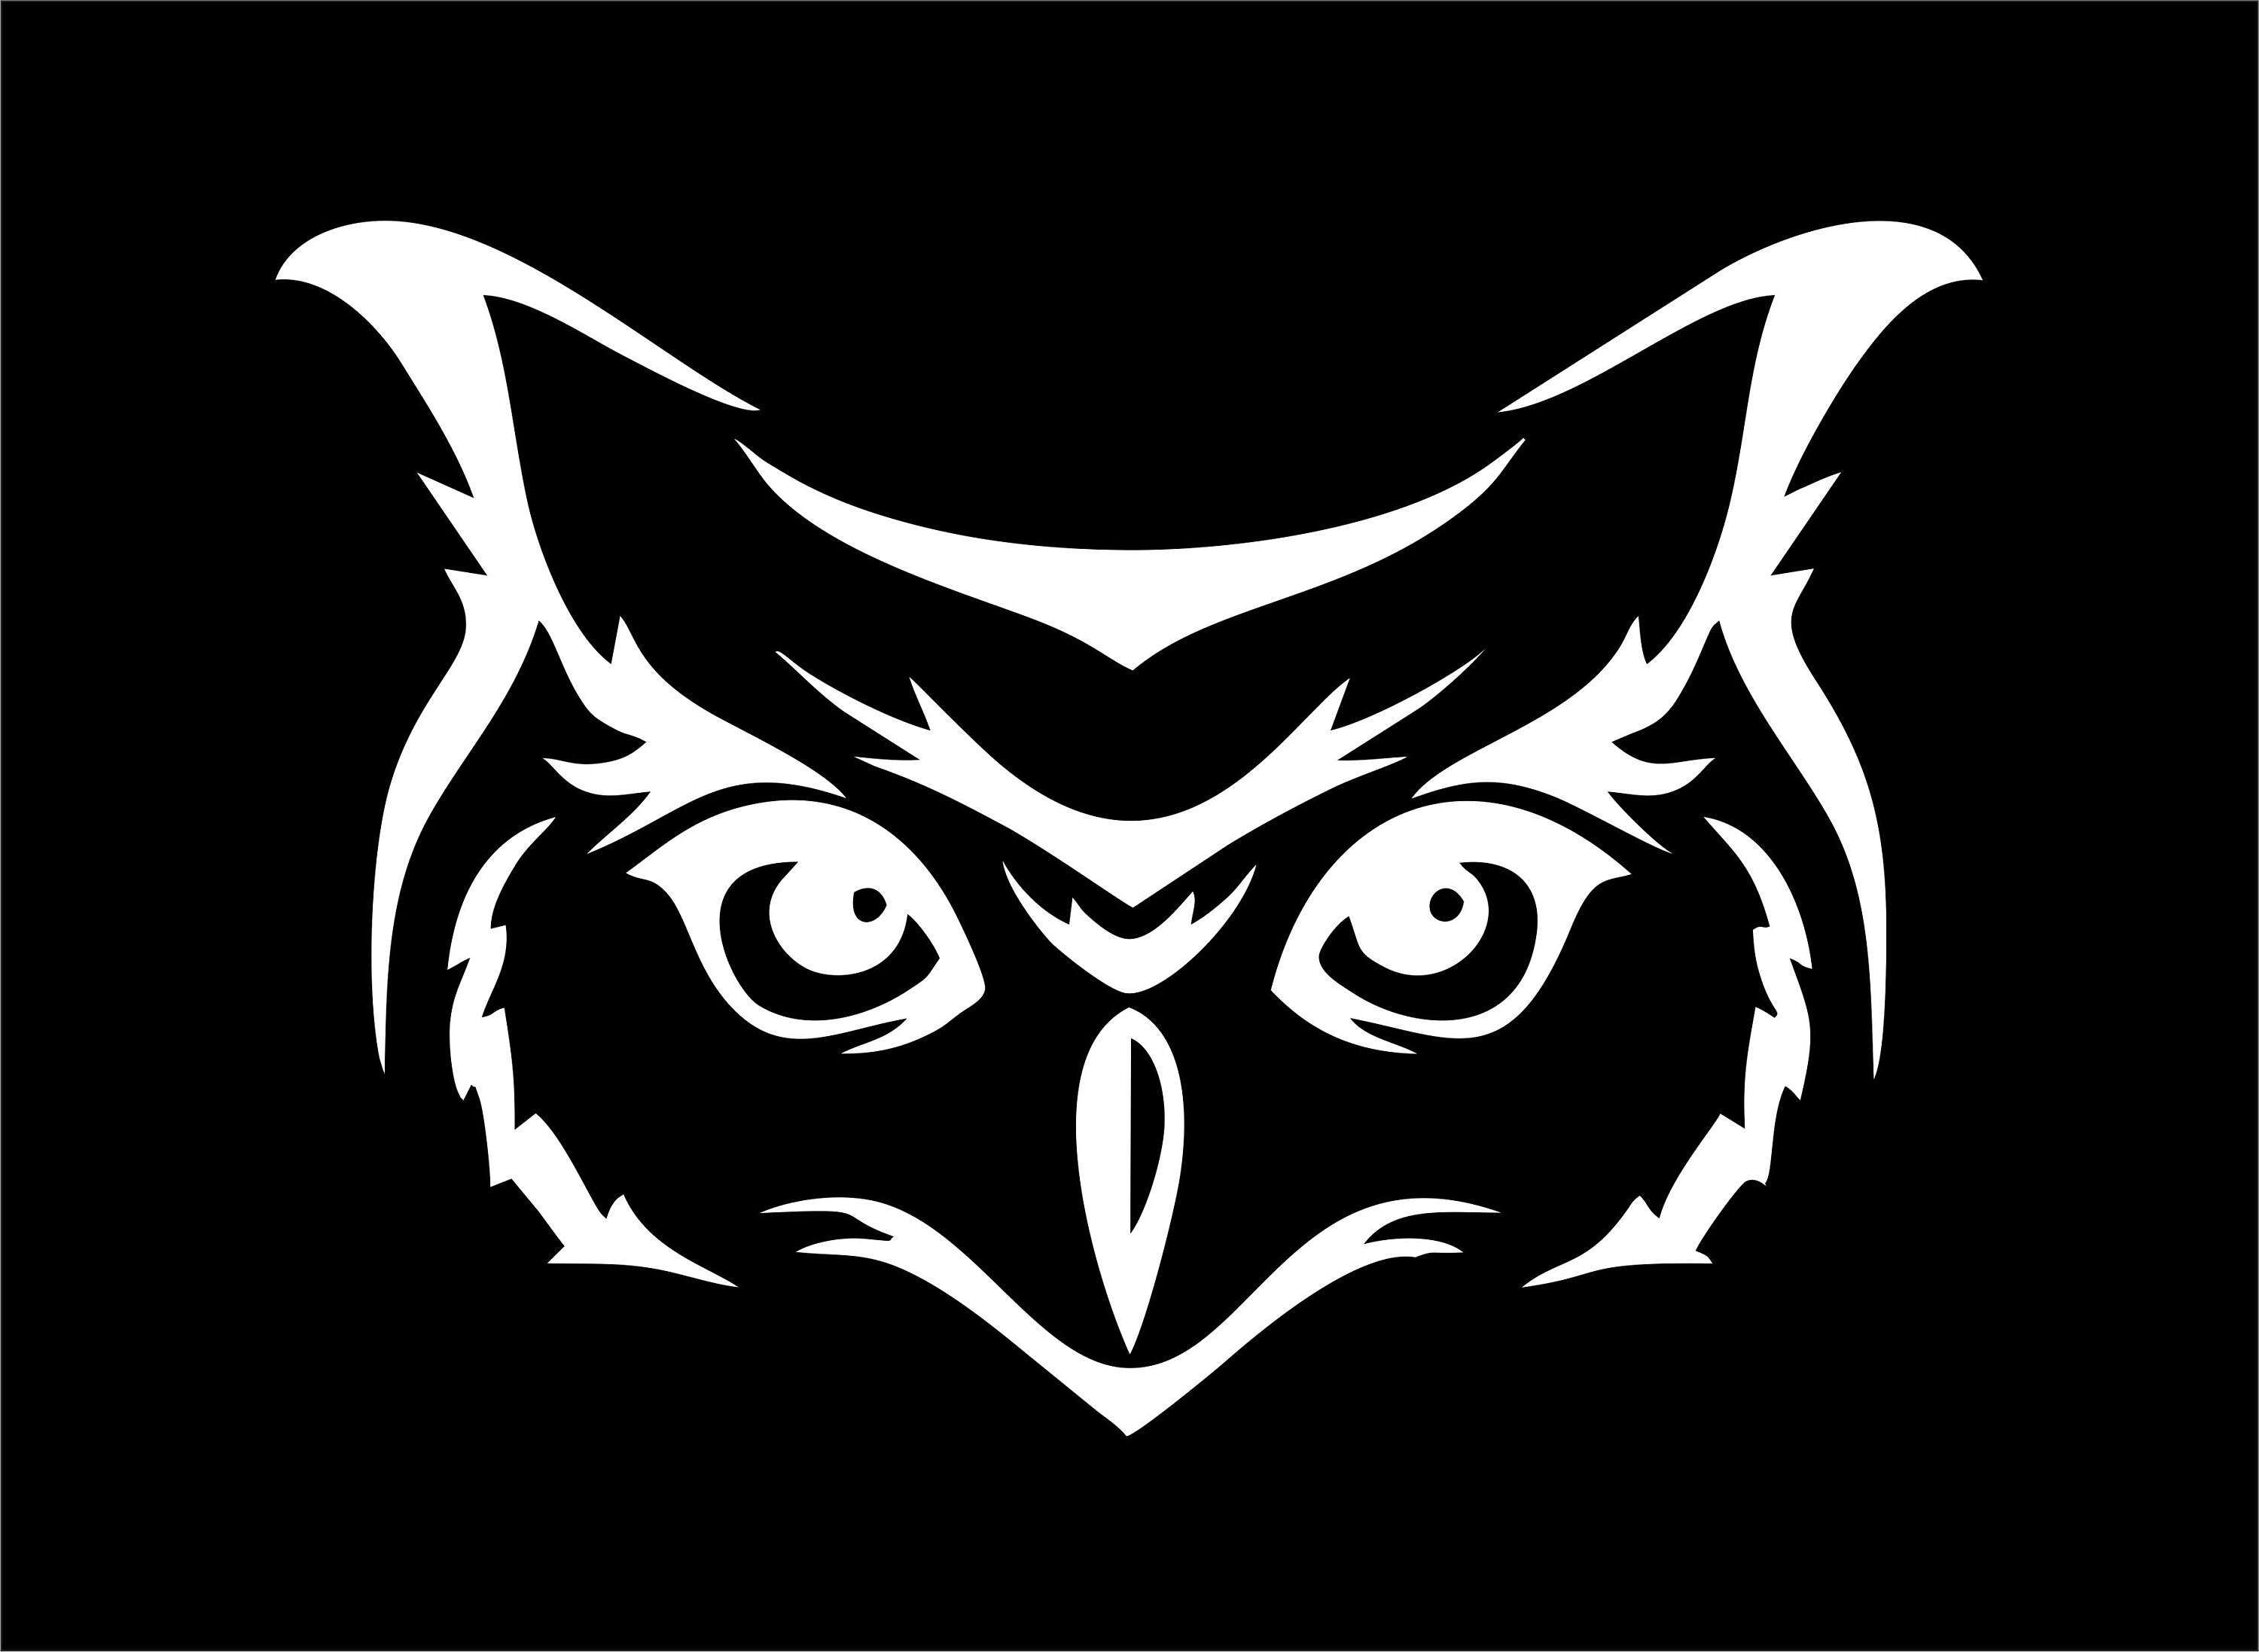 Tribal Barn Owl Decal Sticker Choose Color Size #496 